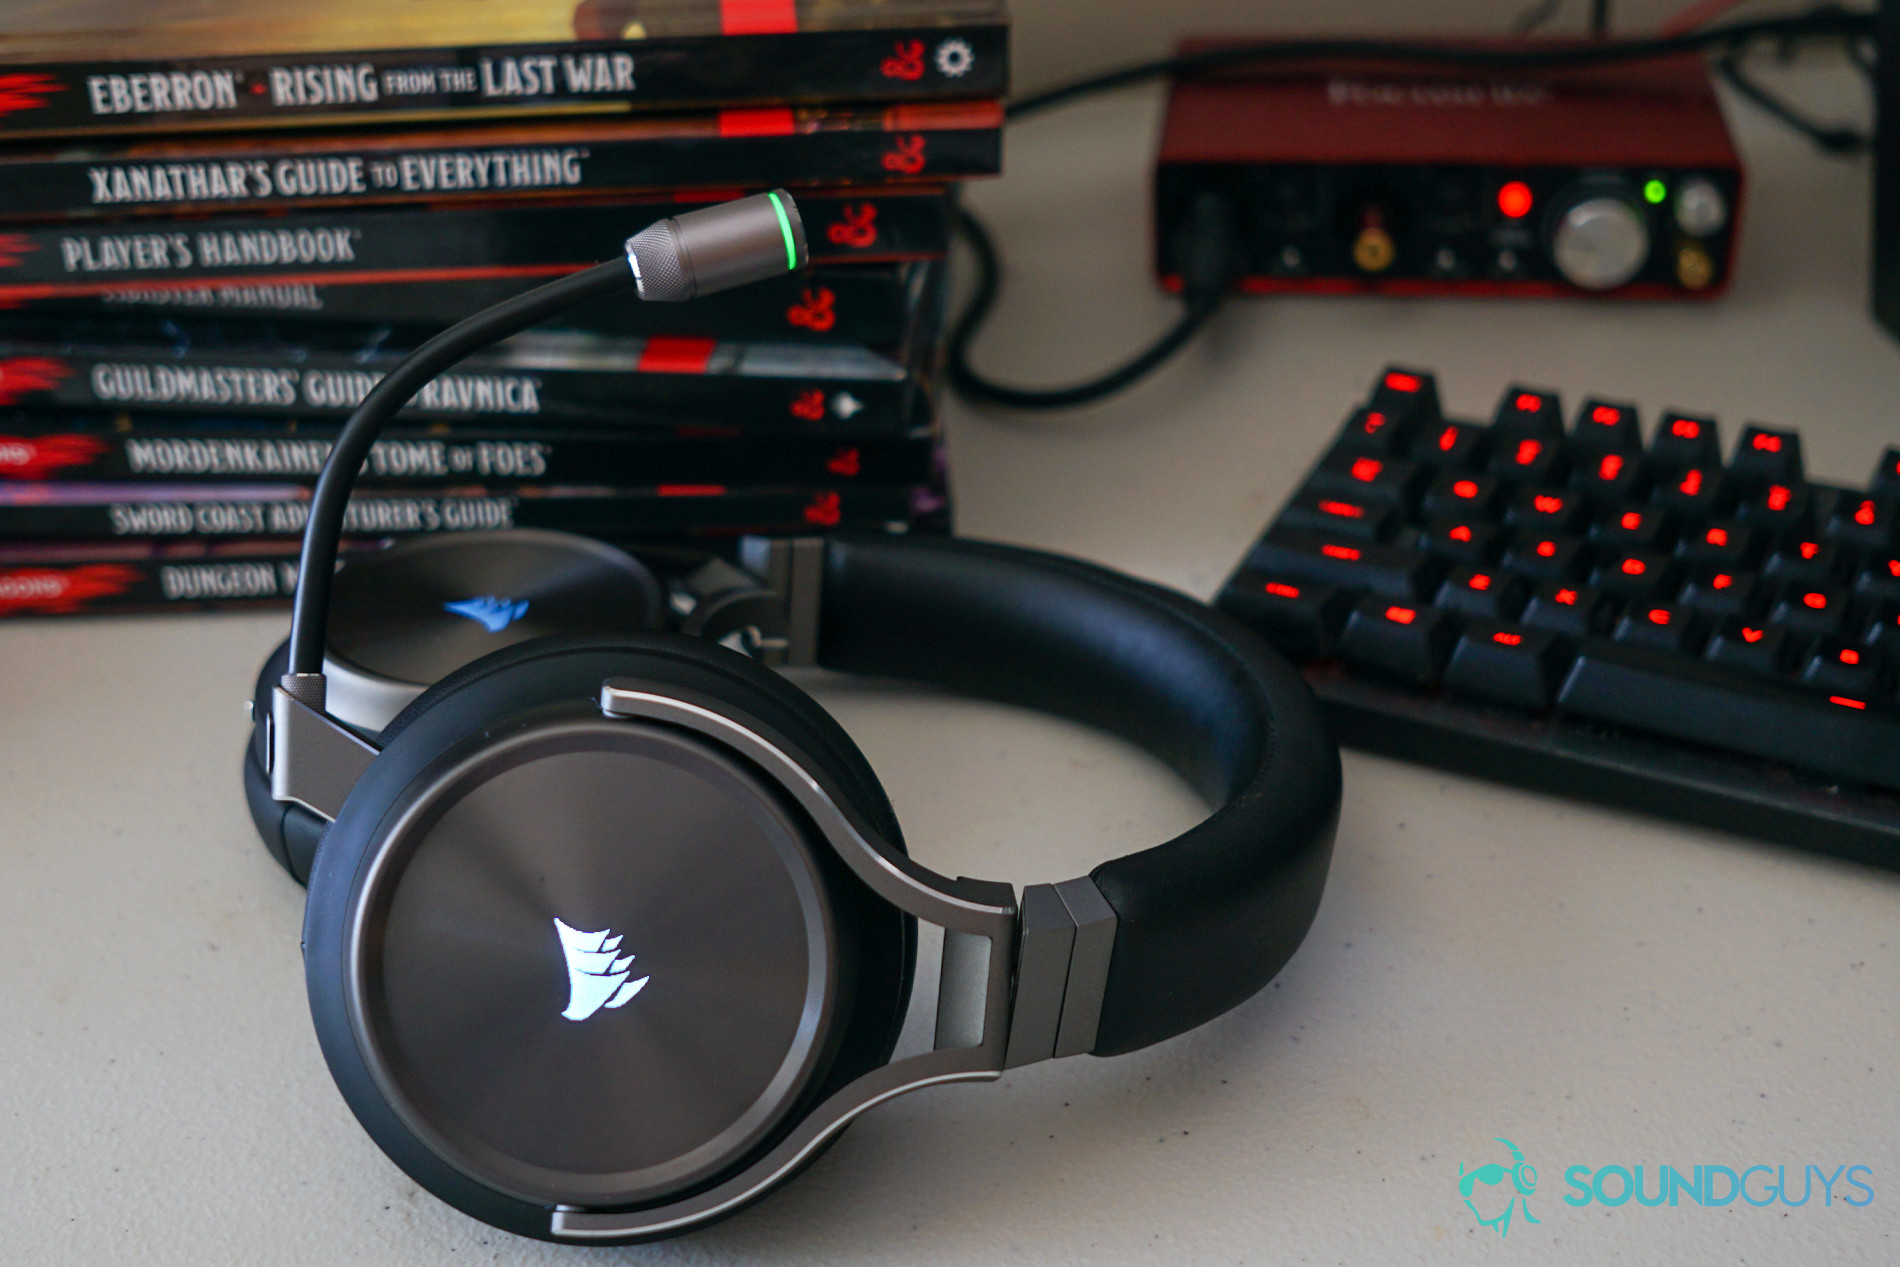 The Corsair Virtuoso Wireless SE sits on a desk next to a Logitech gaming keyboard, a FocusRite Scarlett 2i2, and copies of the Dungeons and Dragons Player's Handbook, Monster Manual, Dungeon Master's Guide, and various associated settings books.